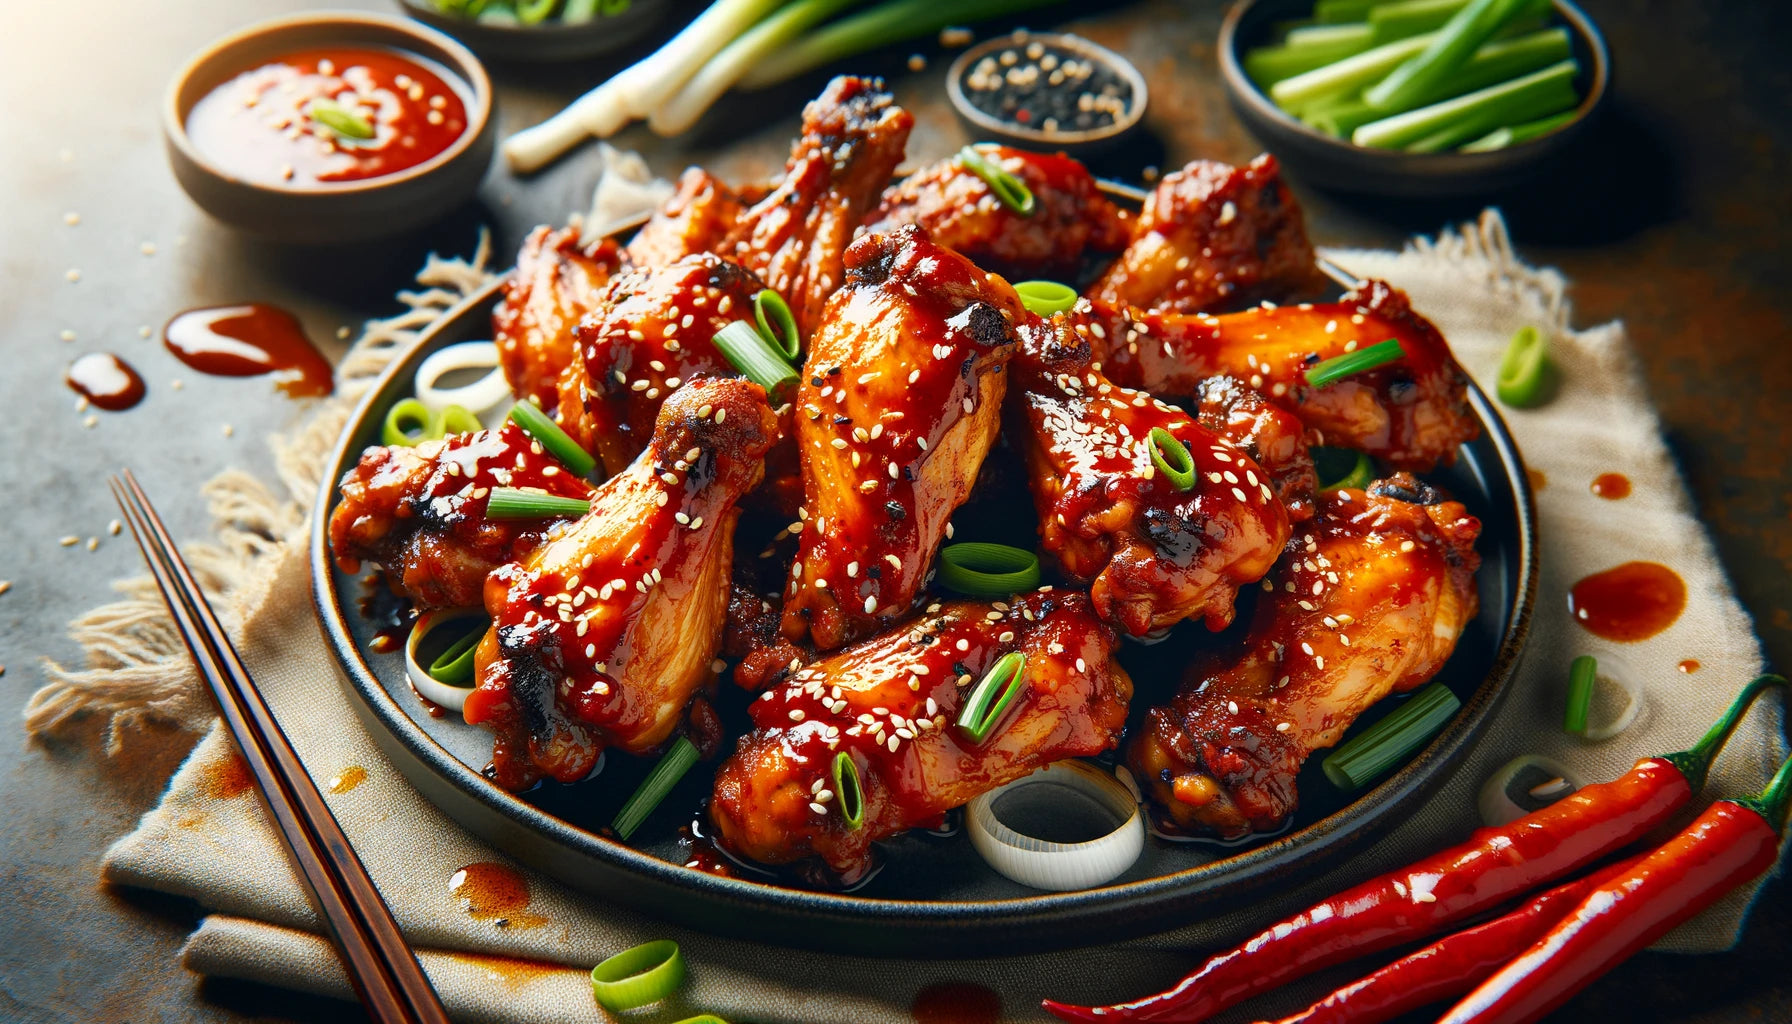 Korean BBQ Chicken Wings with Spicy Sauce Recipe | Arteflame Grill Cooking